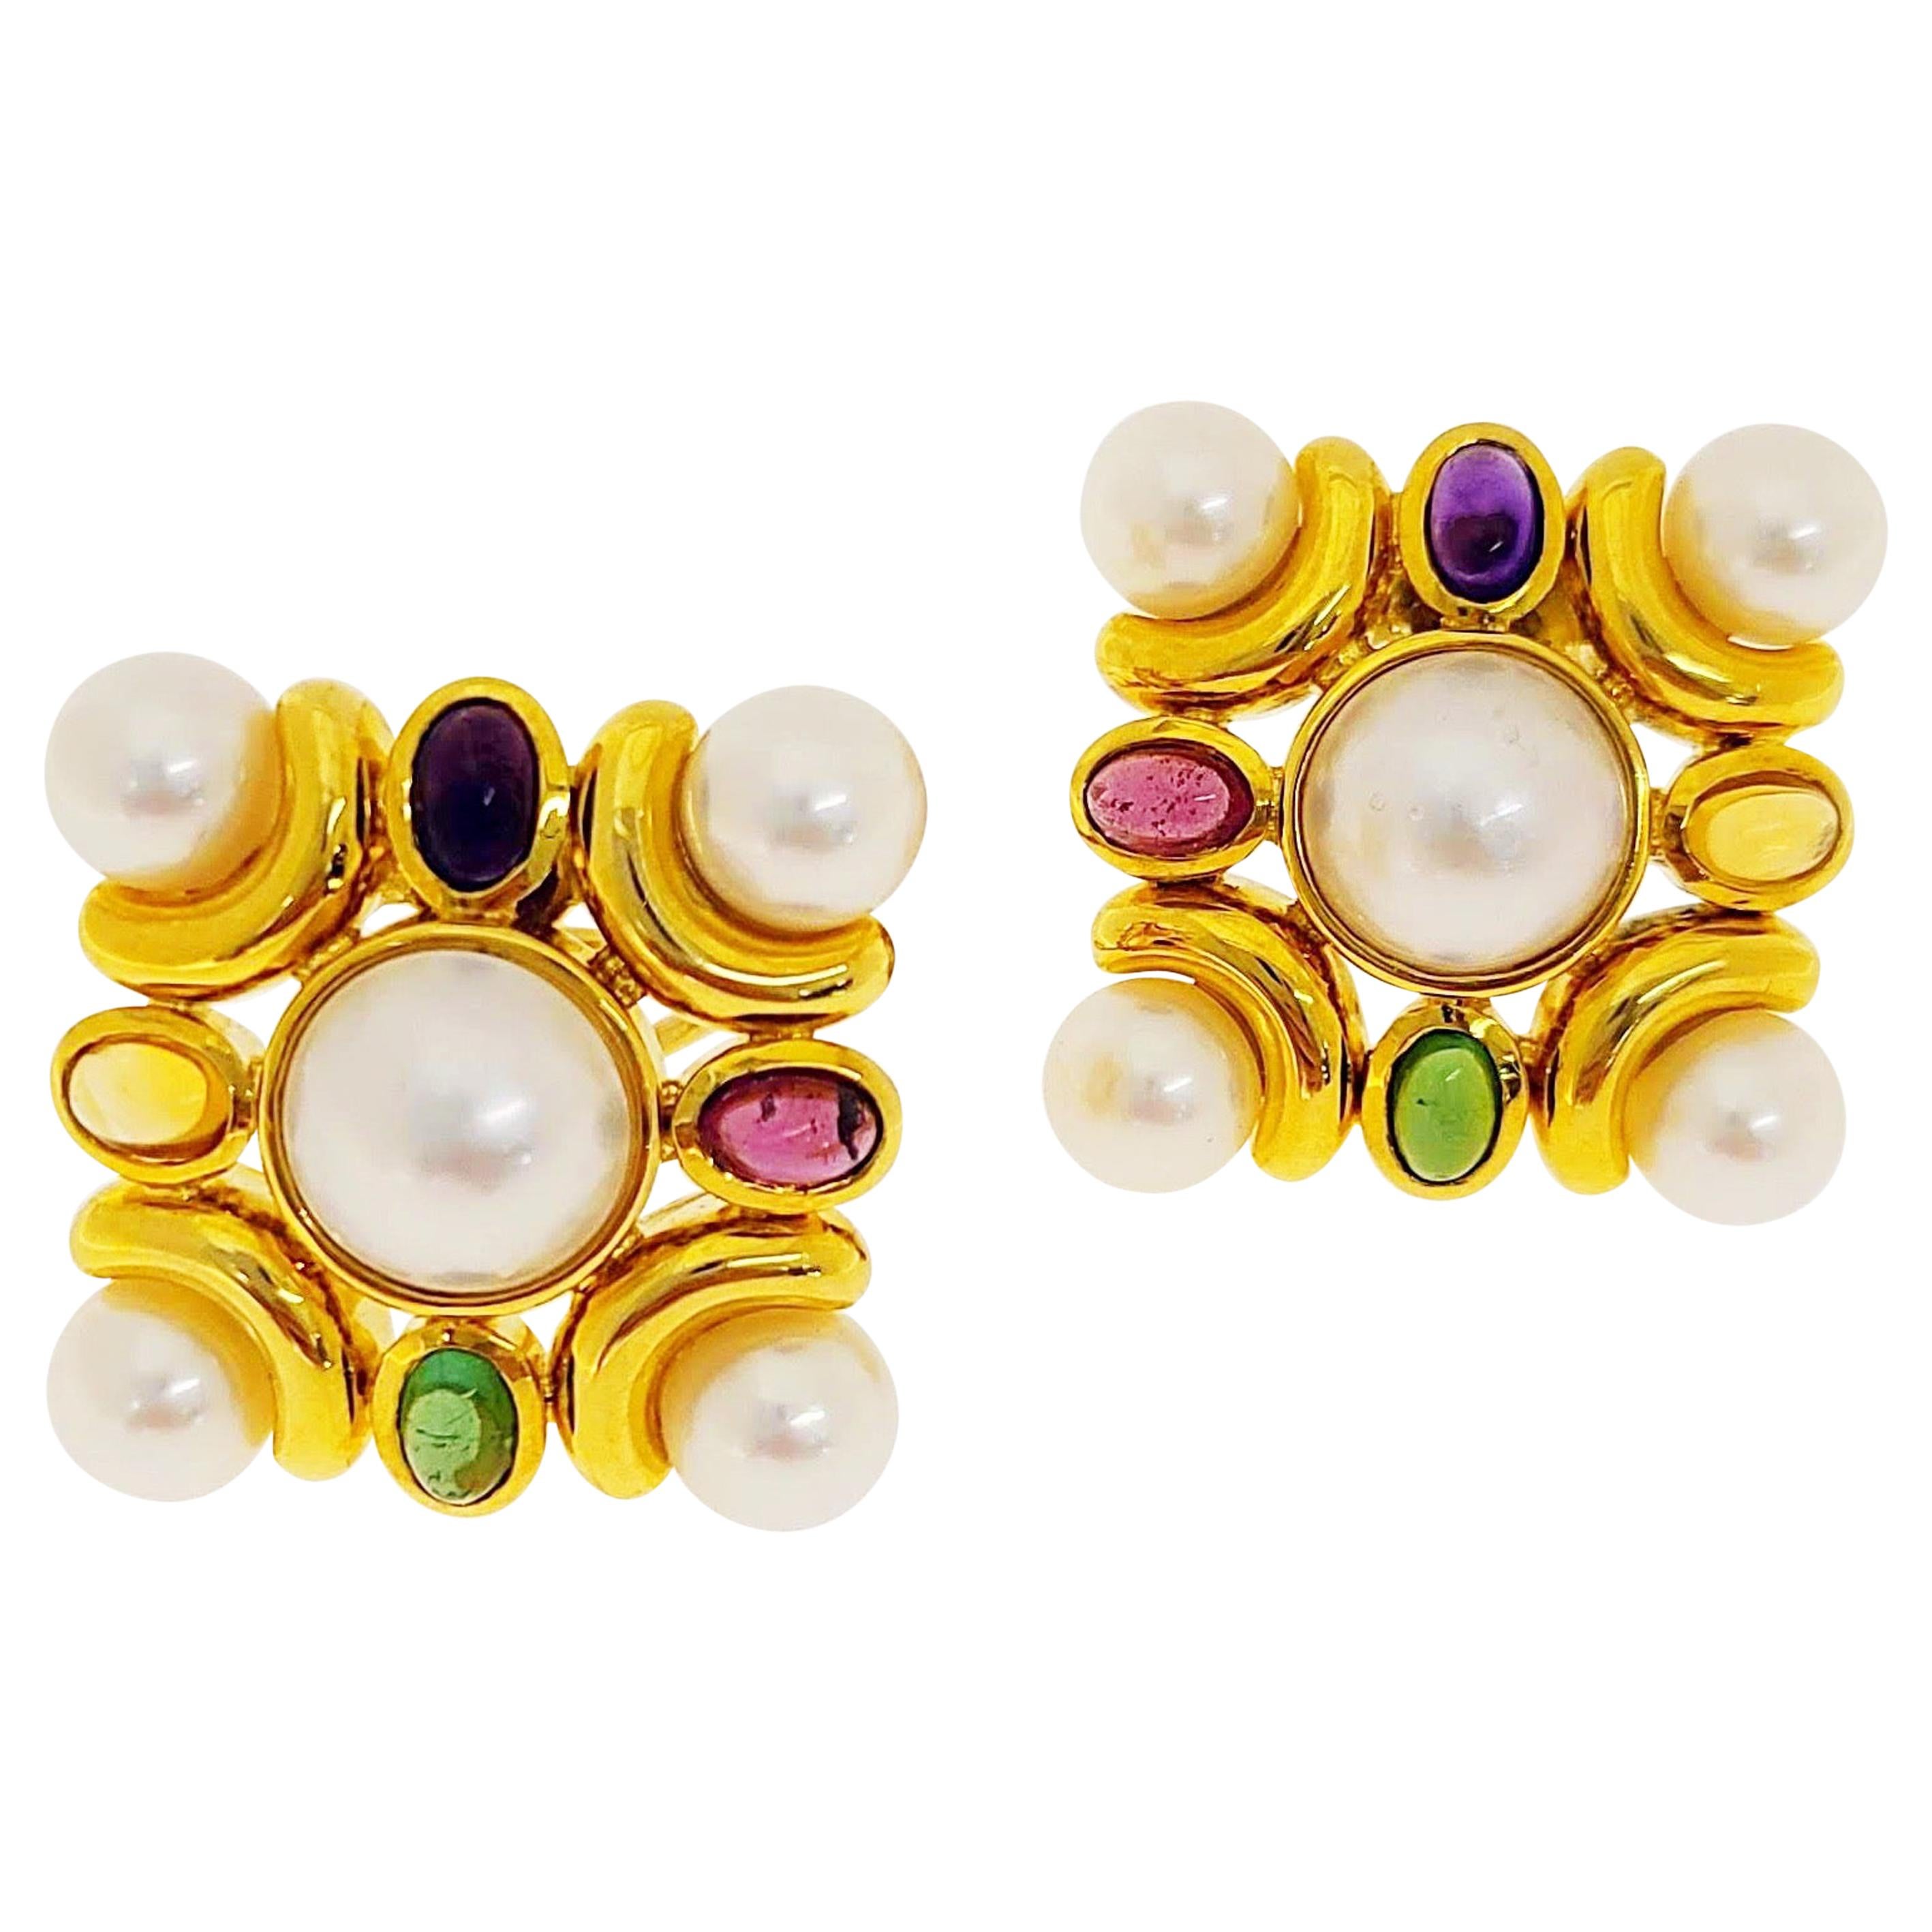 18 Karat Gold Earrings with Mabe Pearls and Multicolored Semi Precious Stones